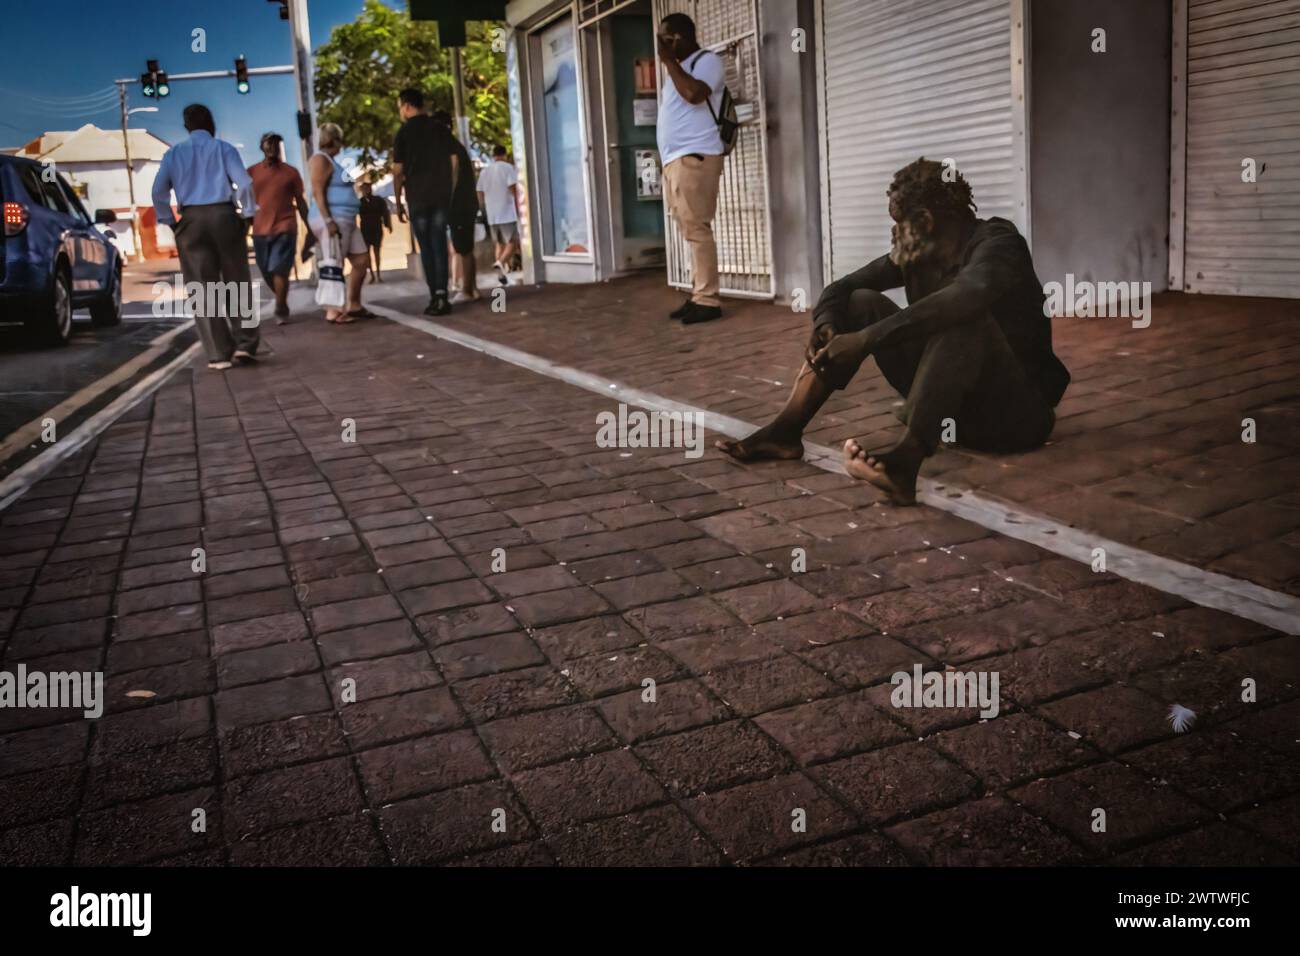 Depicting isolation, a lone person sits on the sidewalk with their head down, while others pass by without notice Stock Photo